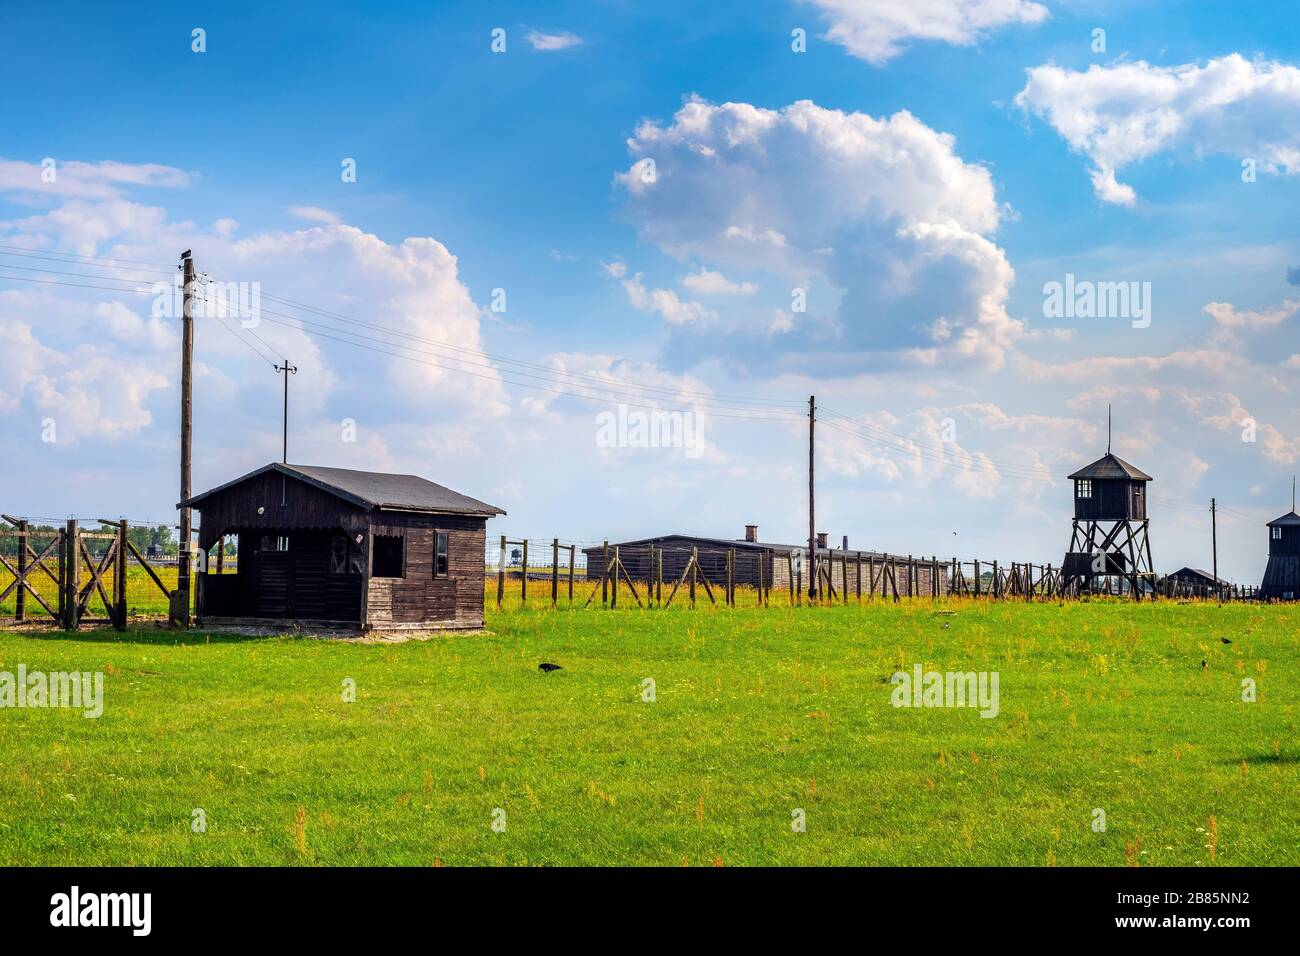 Lublin, Lubelskie / Poland - 2019/08/17: Panoramic view of the Majdanek KL Lublin Nazis concentration camp with guards towers and barbed-wire fences Stock Photo